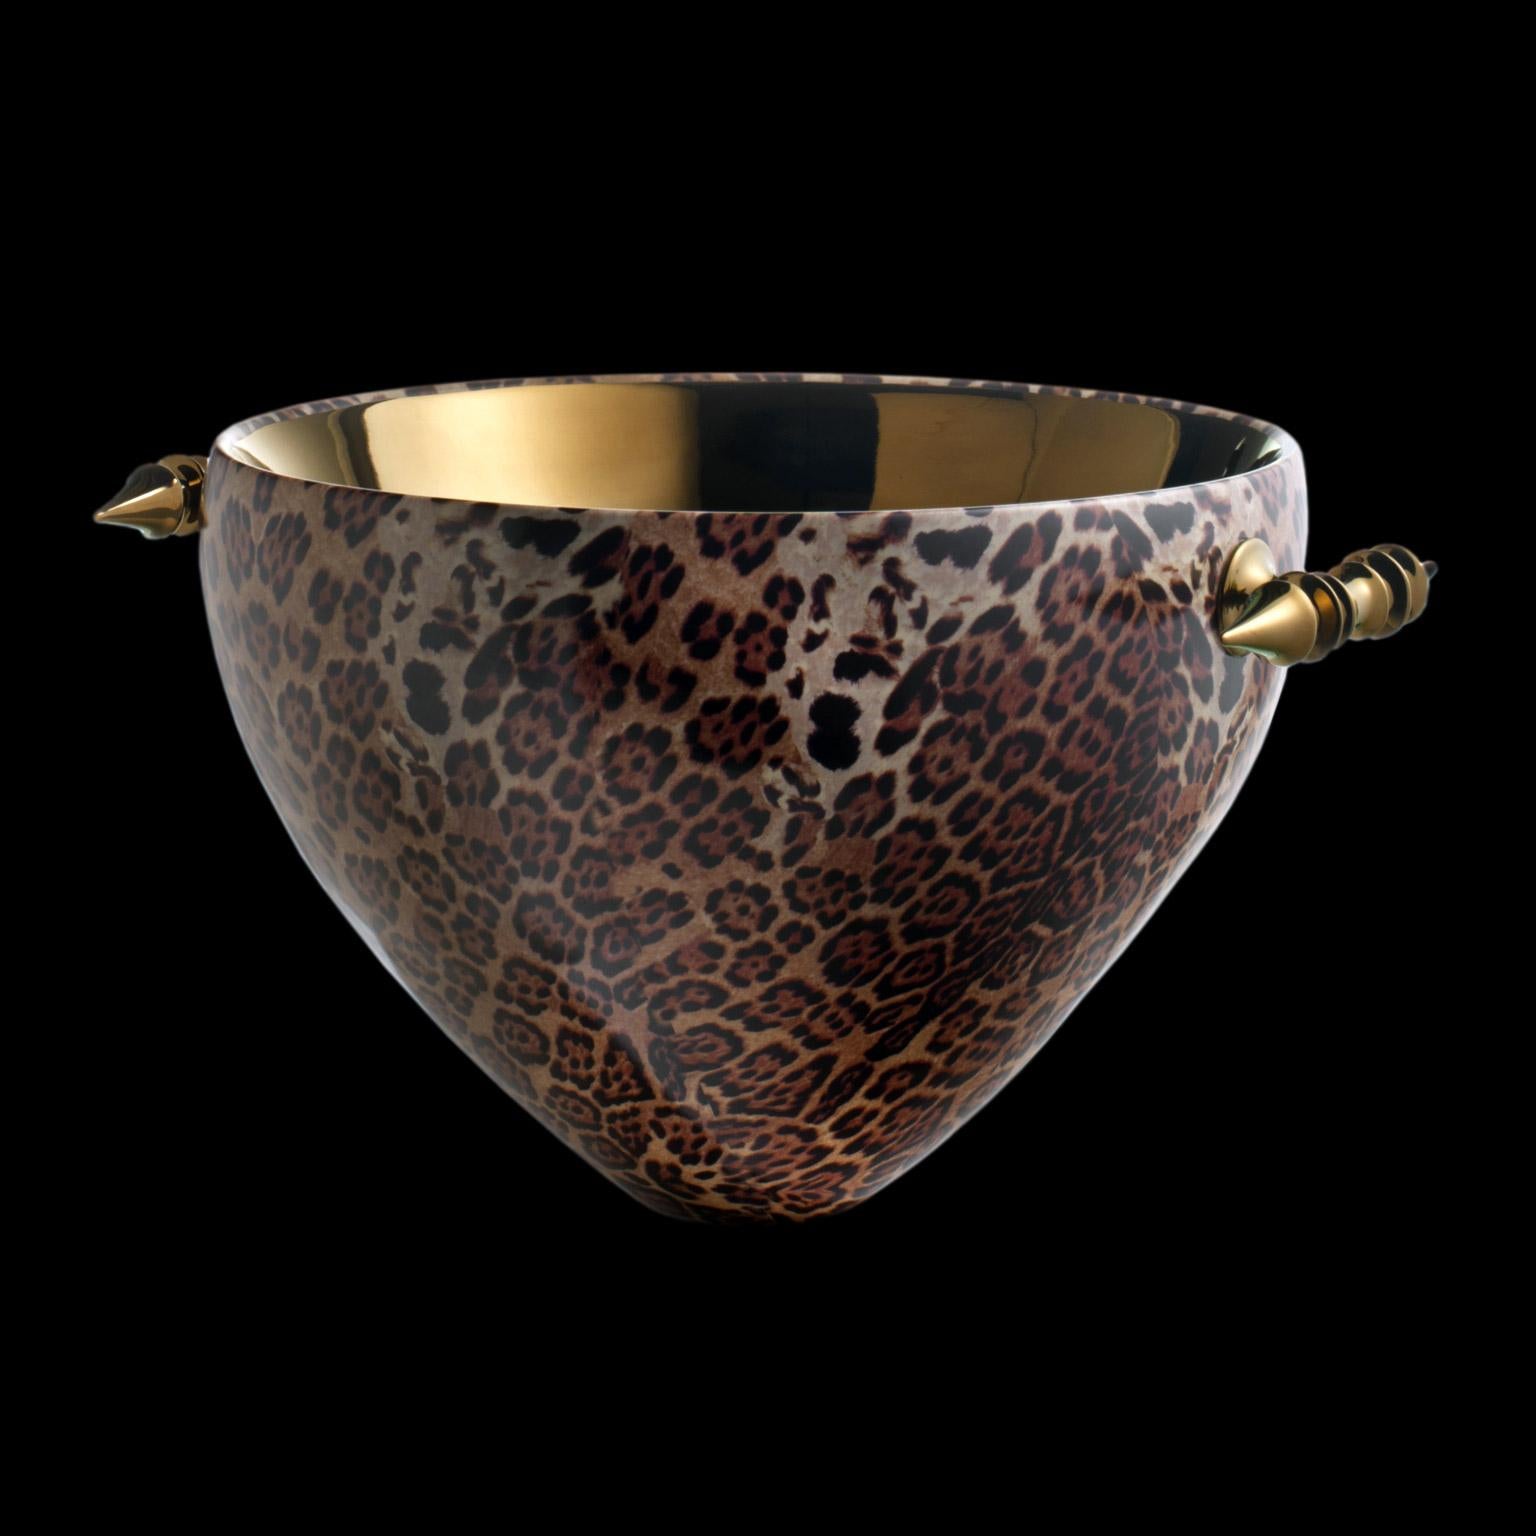 Ceramic bowl leopard decorated with inside and handles handcrafted in bronze
Gabriel - code CP036H - H. 40.0 cm. - Dm. 70.0 cm.